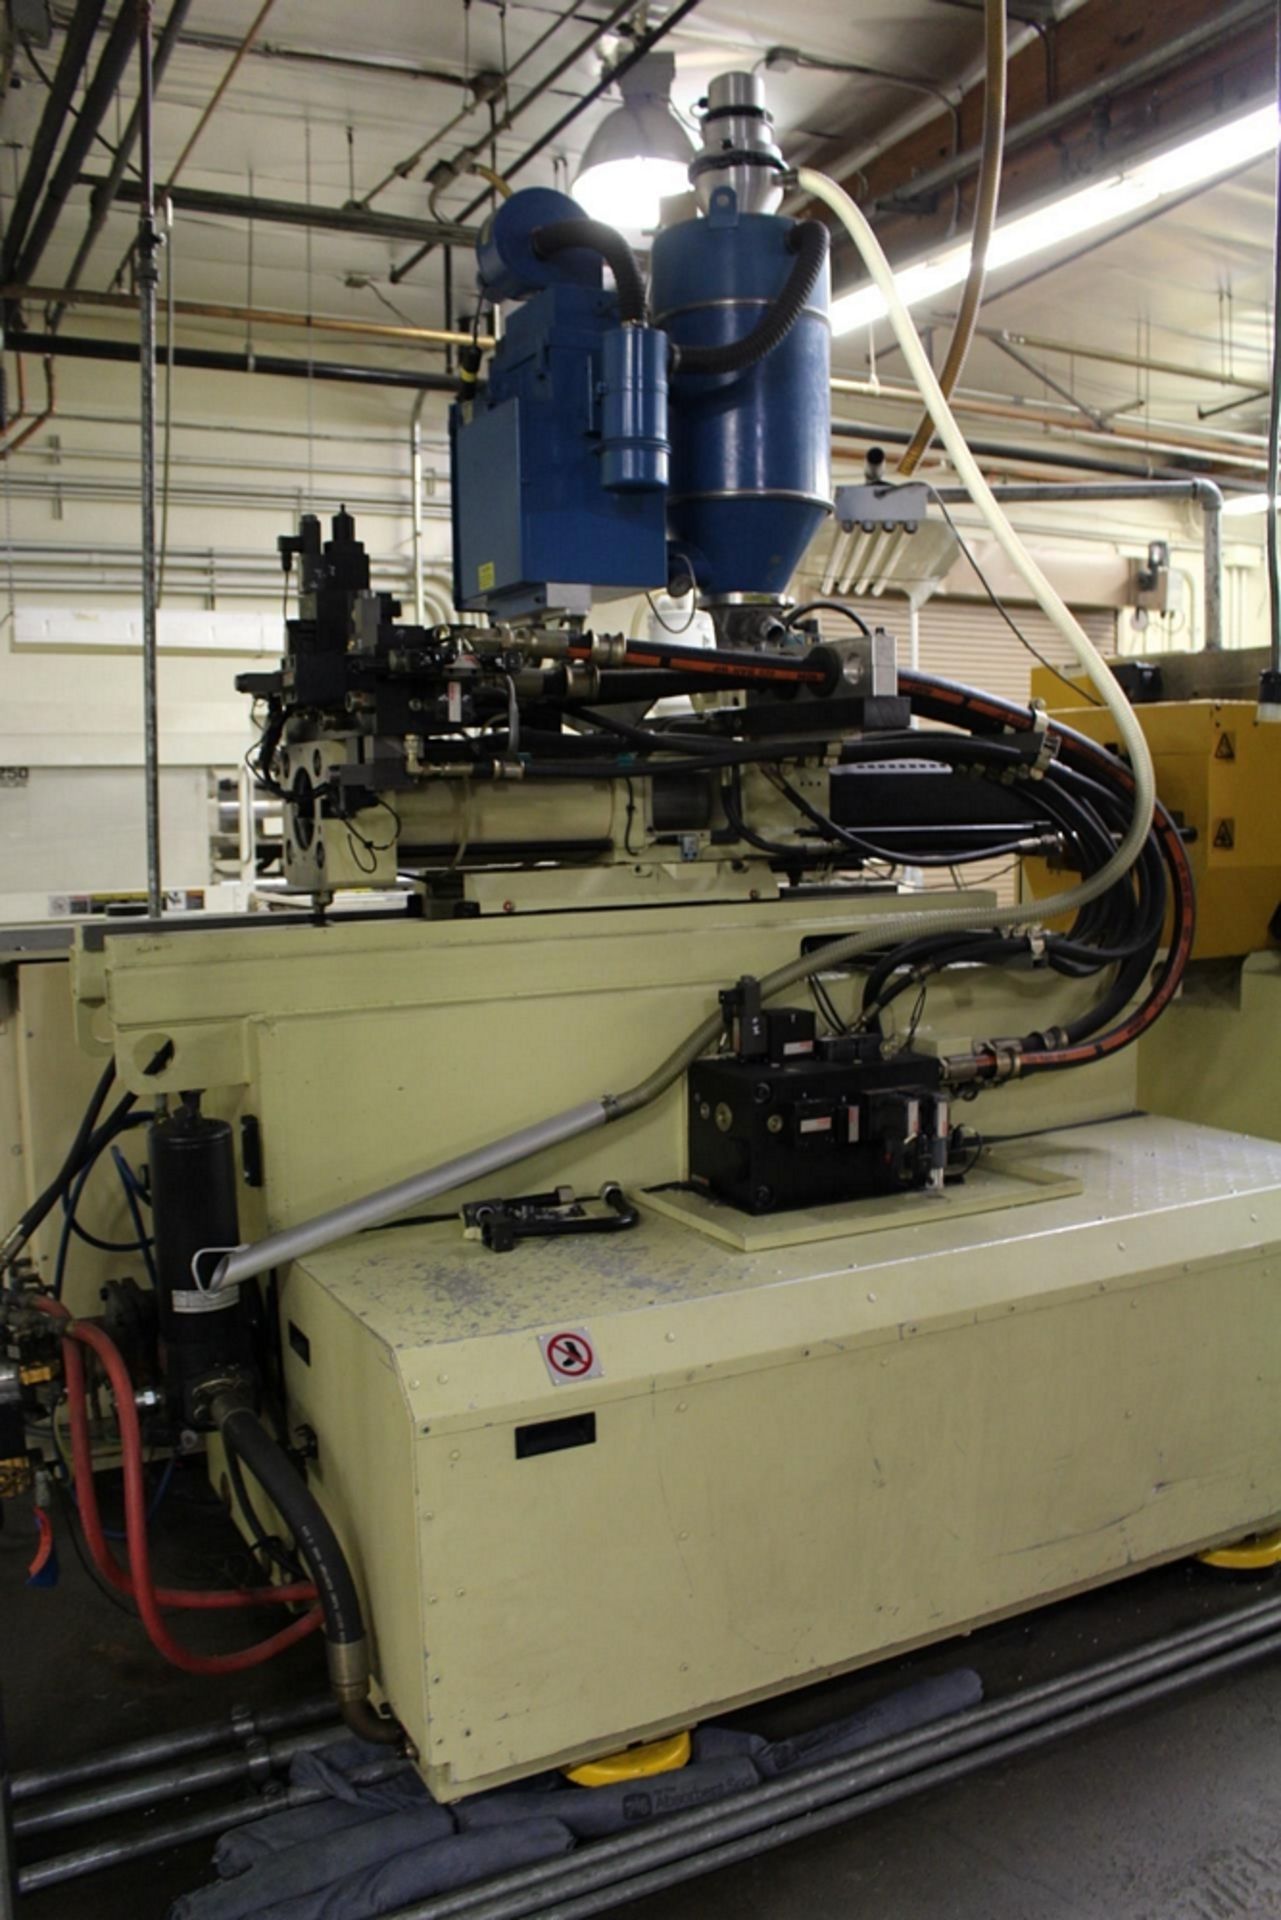 1995 HUSKY 225-TON INJECTION MOLDING MACHINE, MODEL CX160 RS42/42, S/N 11831, 31.5" X 31.5" PLATENS, - Image 6 of 8